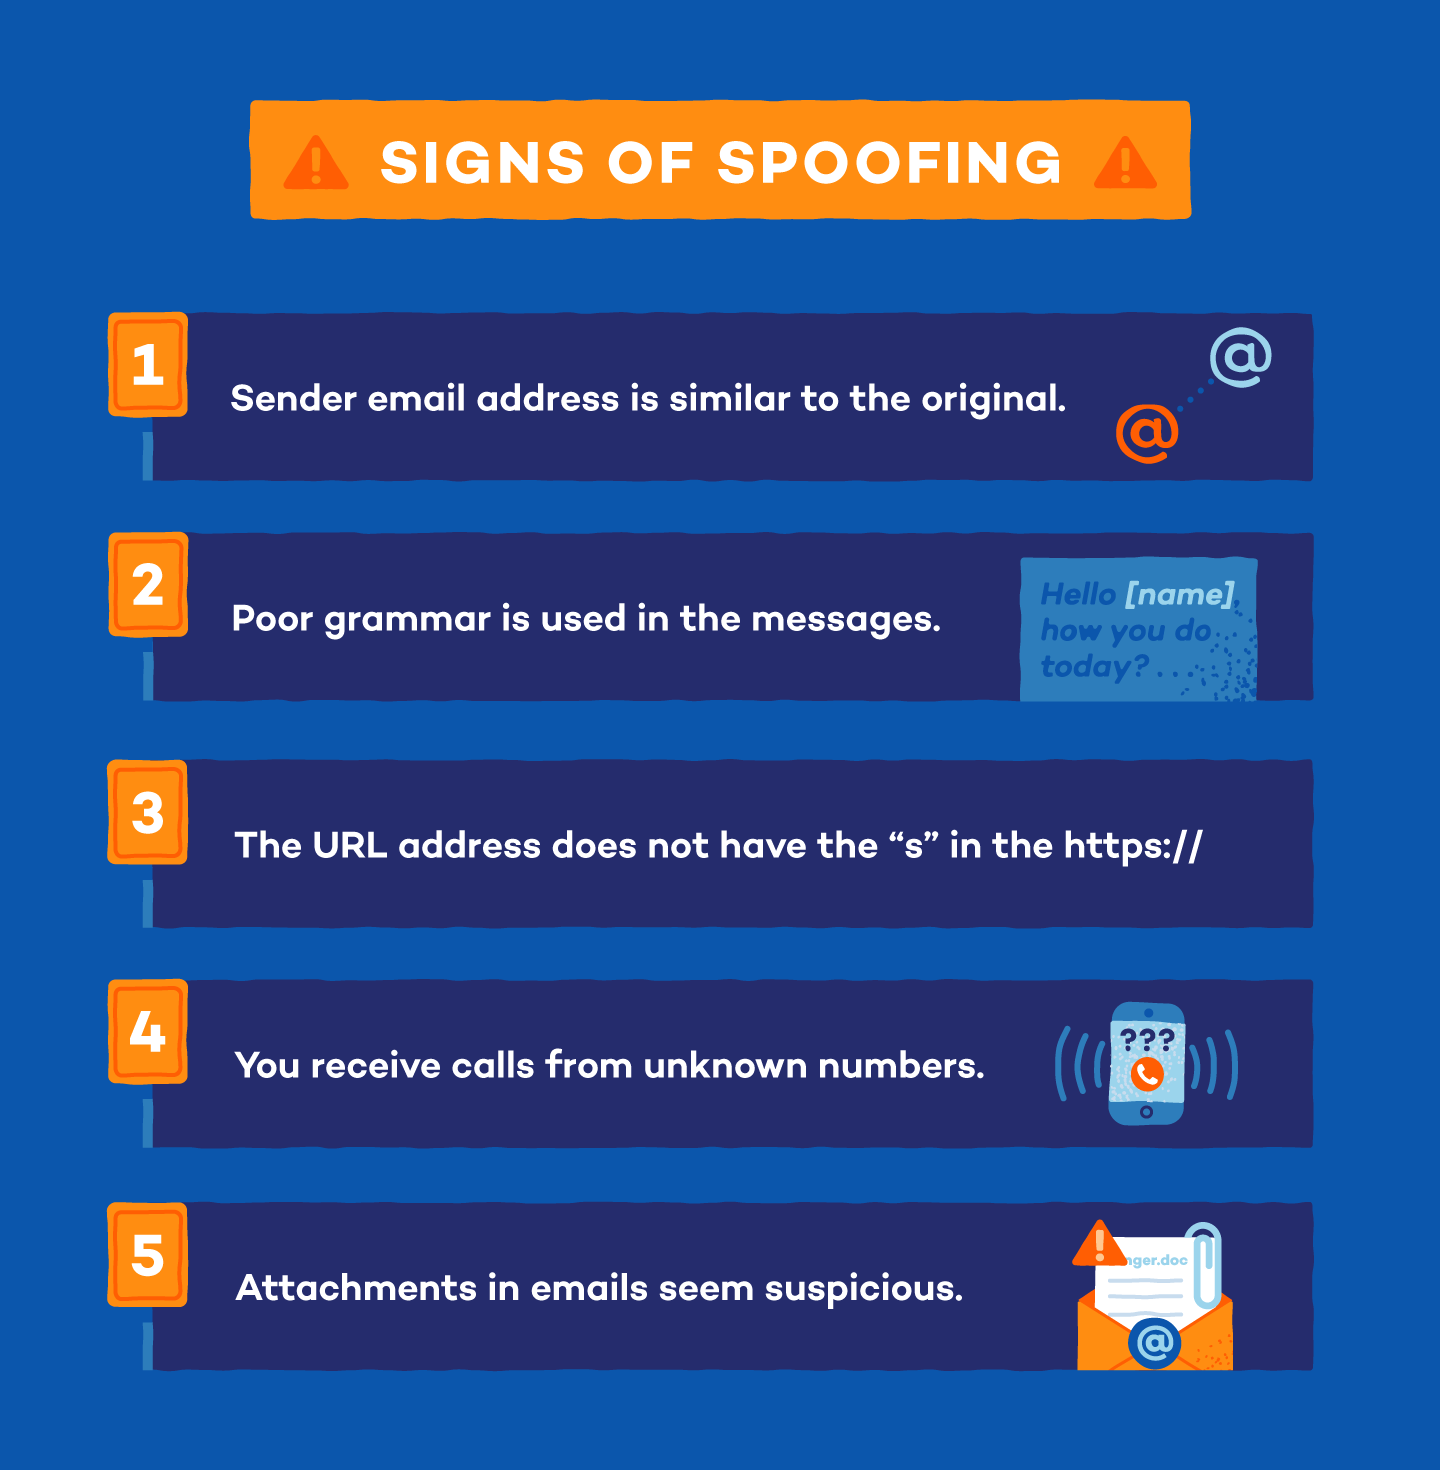 An illustration showing the signs of spoofing